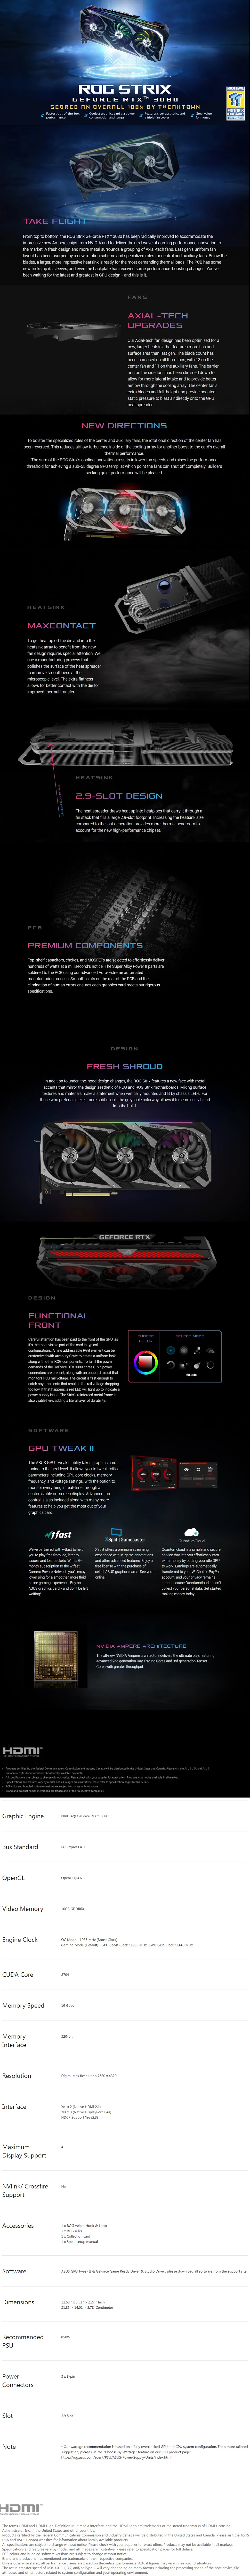 A large marketing image providing additional information about the product ASUS GeForce RTX 3080 ROG Strix Gaming LHR 10GB GDDR6X - Additional alt info not provided